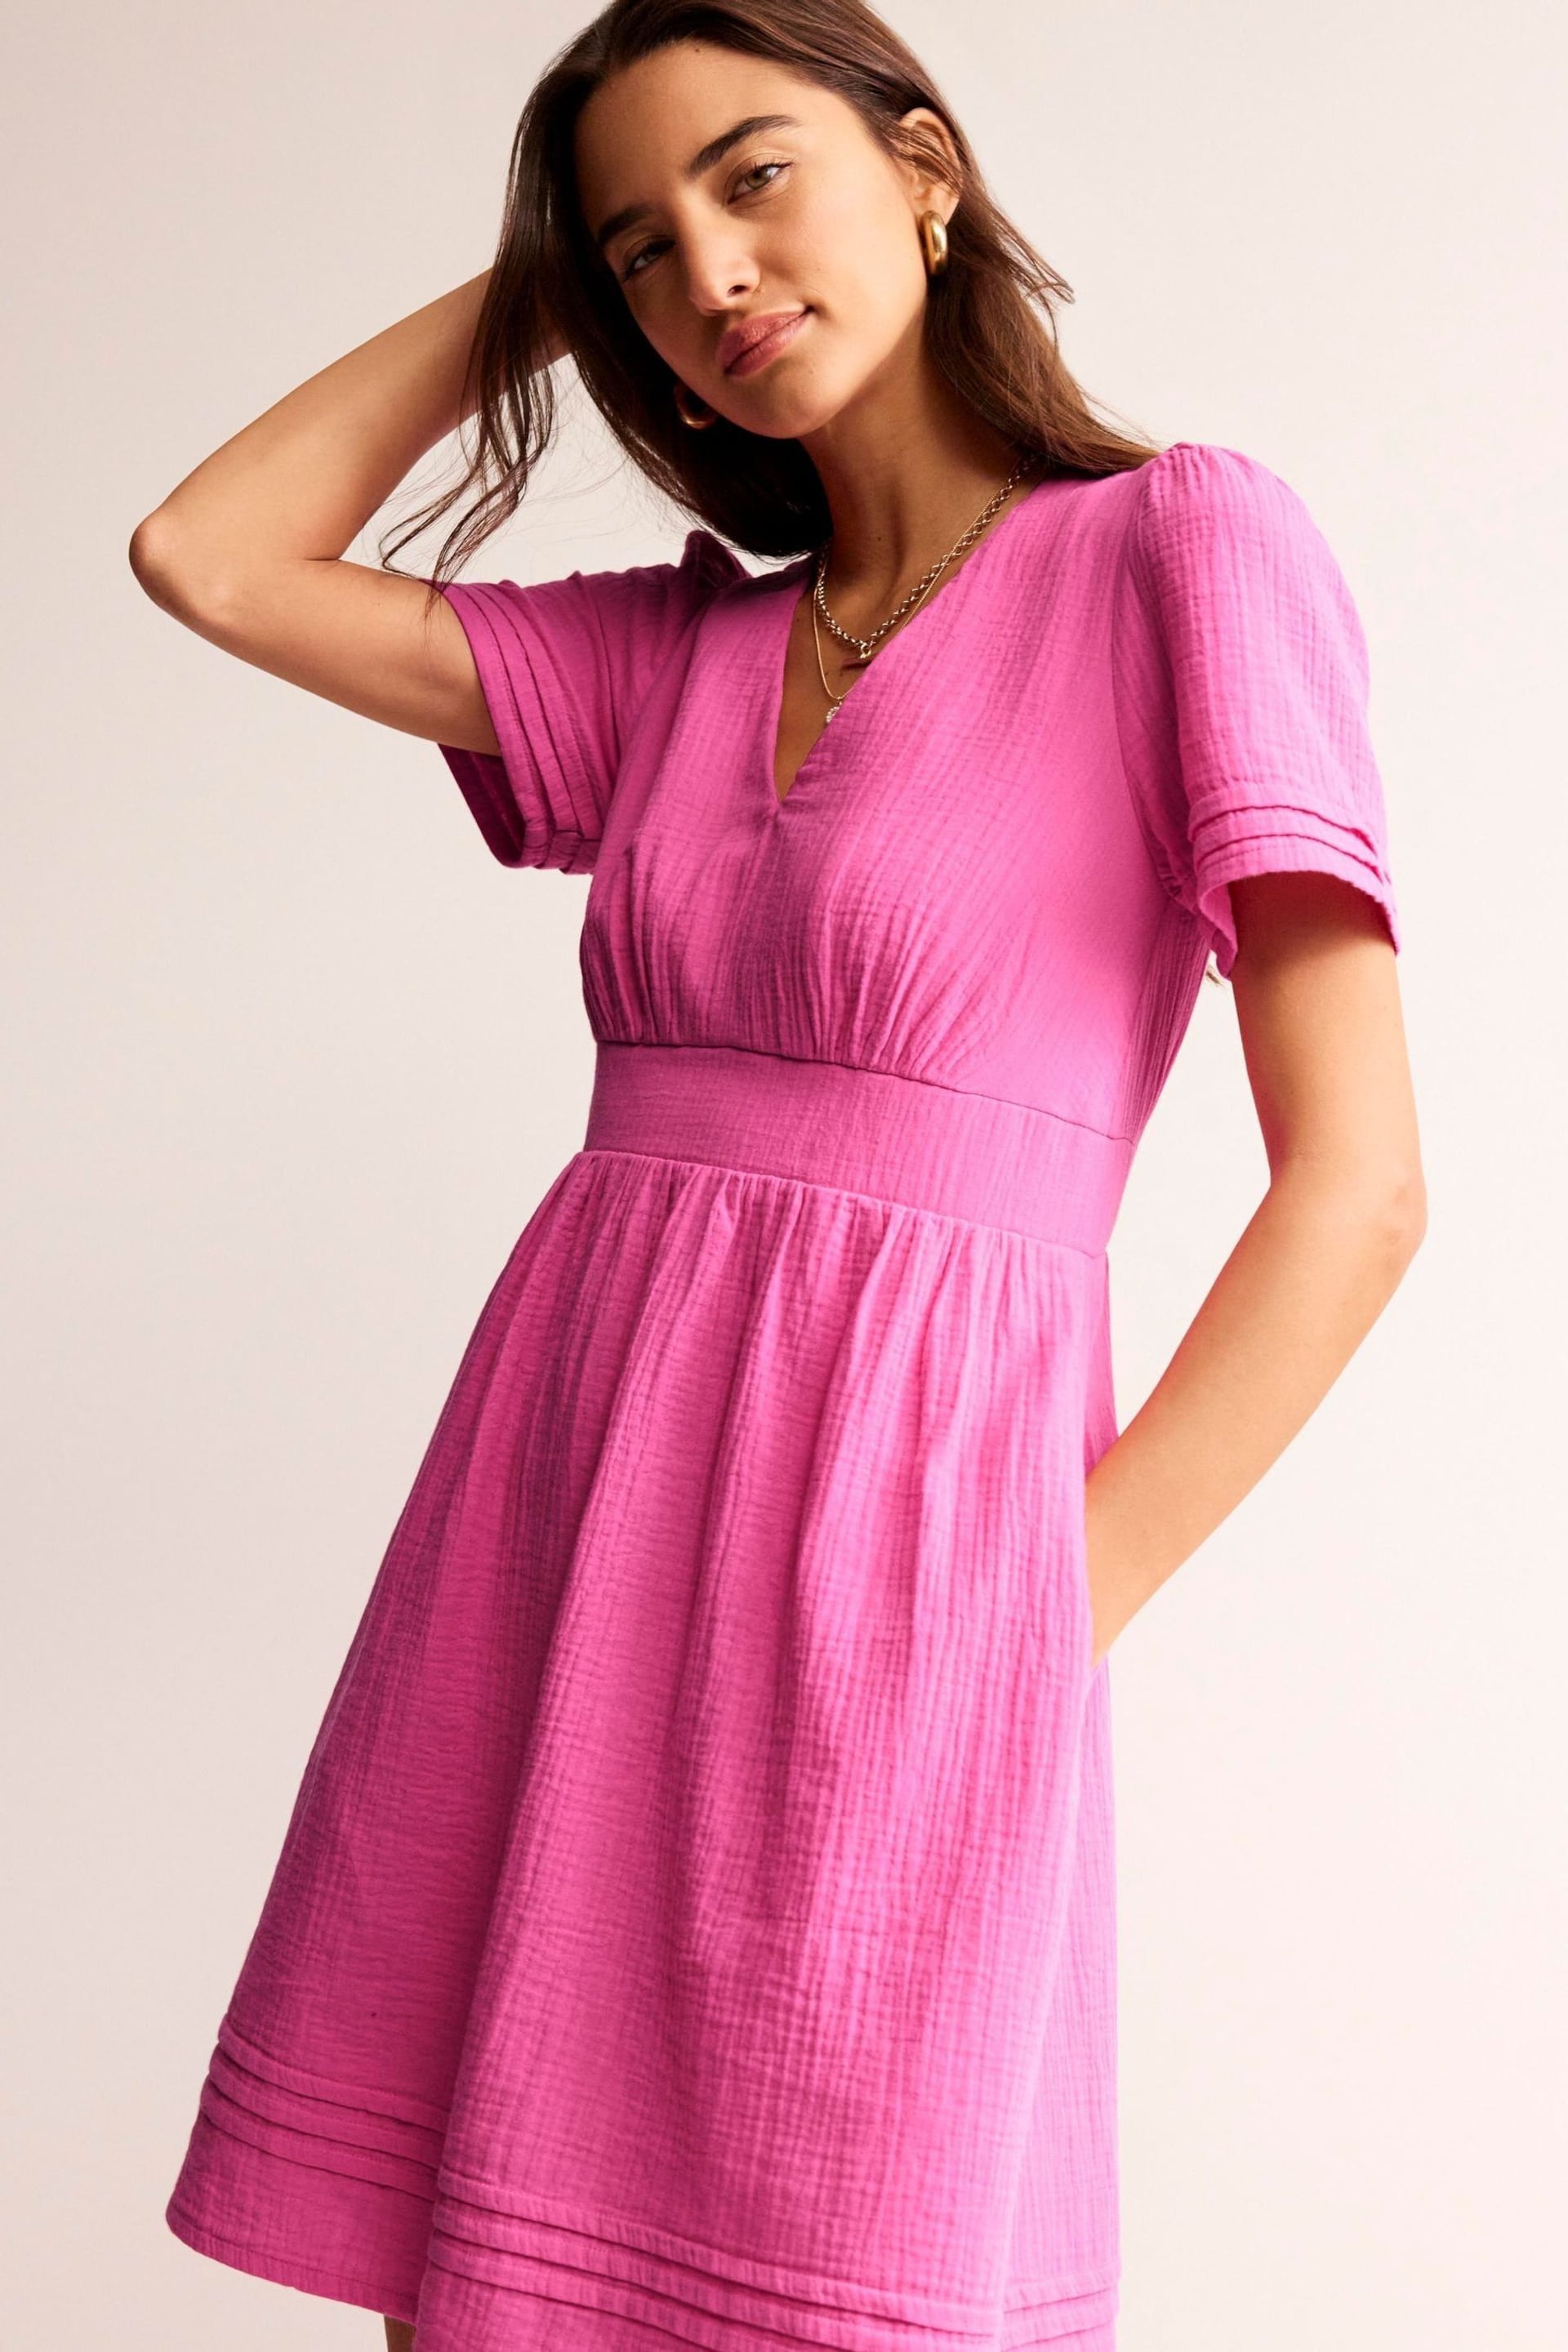 Boden Pink Eve Double Cloth Short Dress - Image 4 of 5